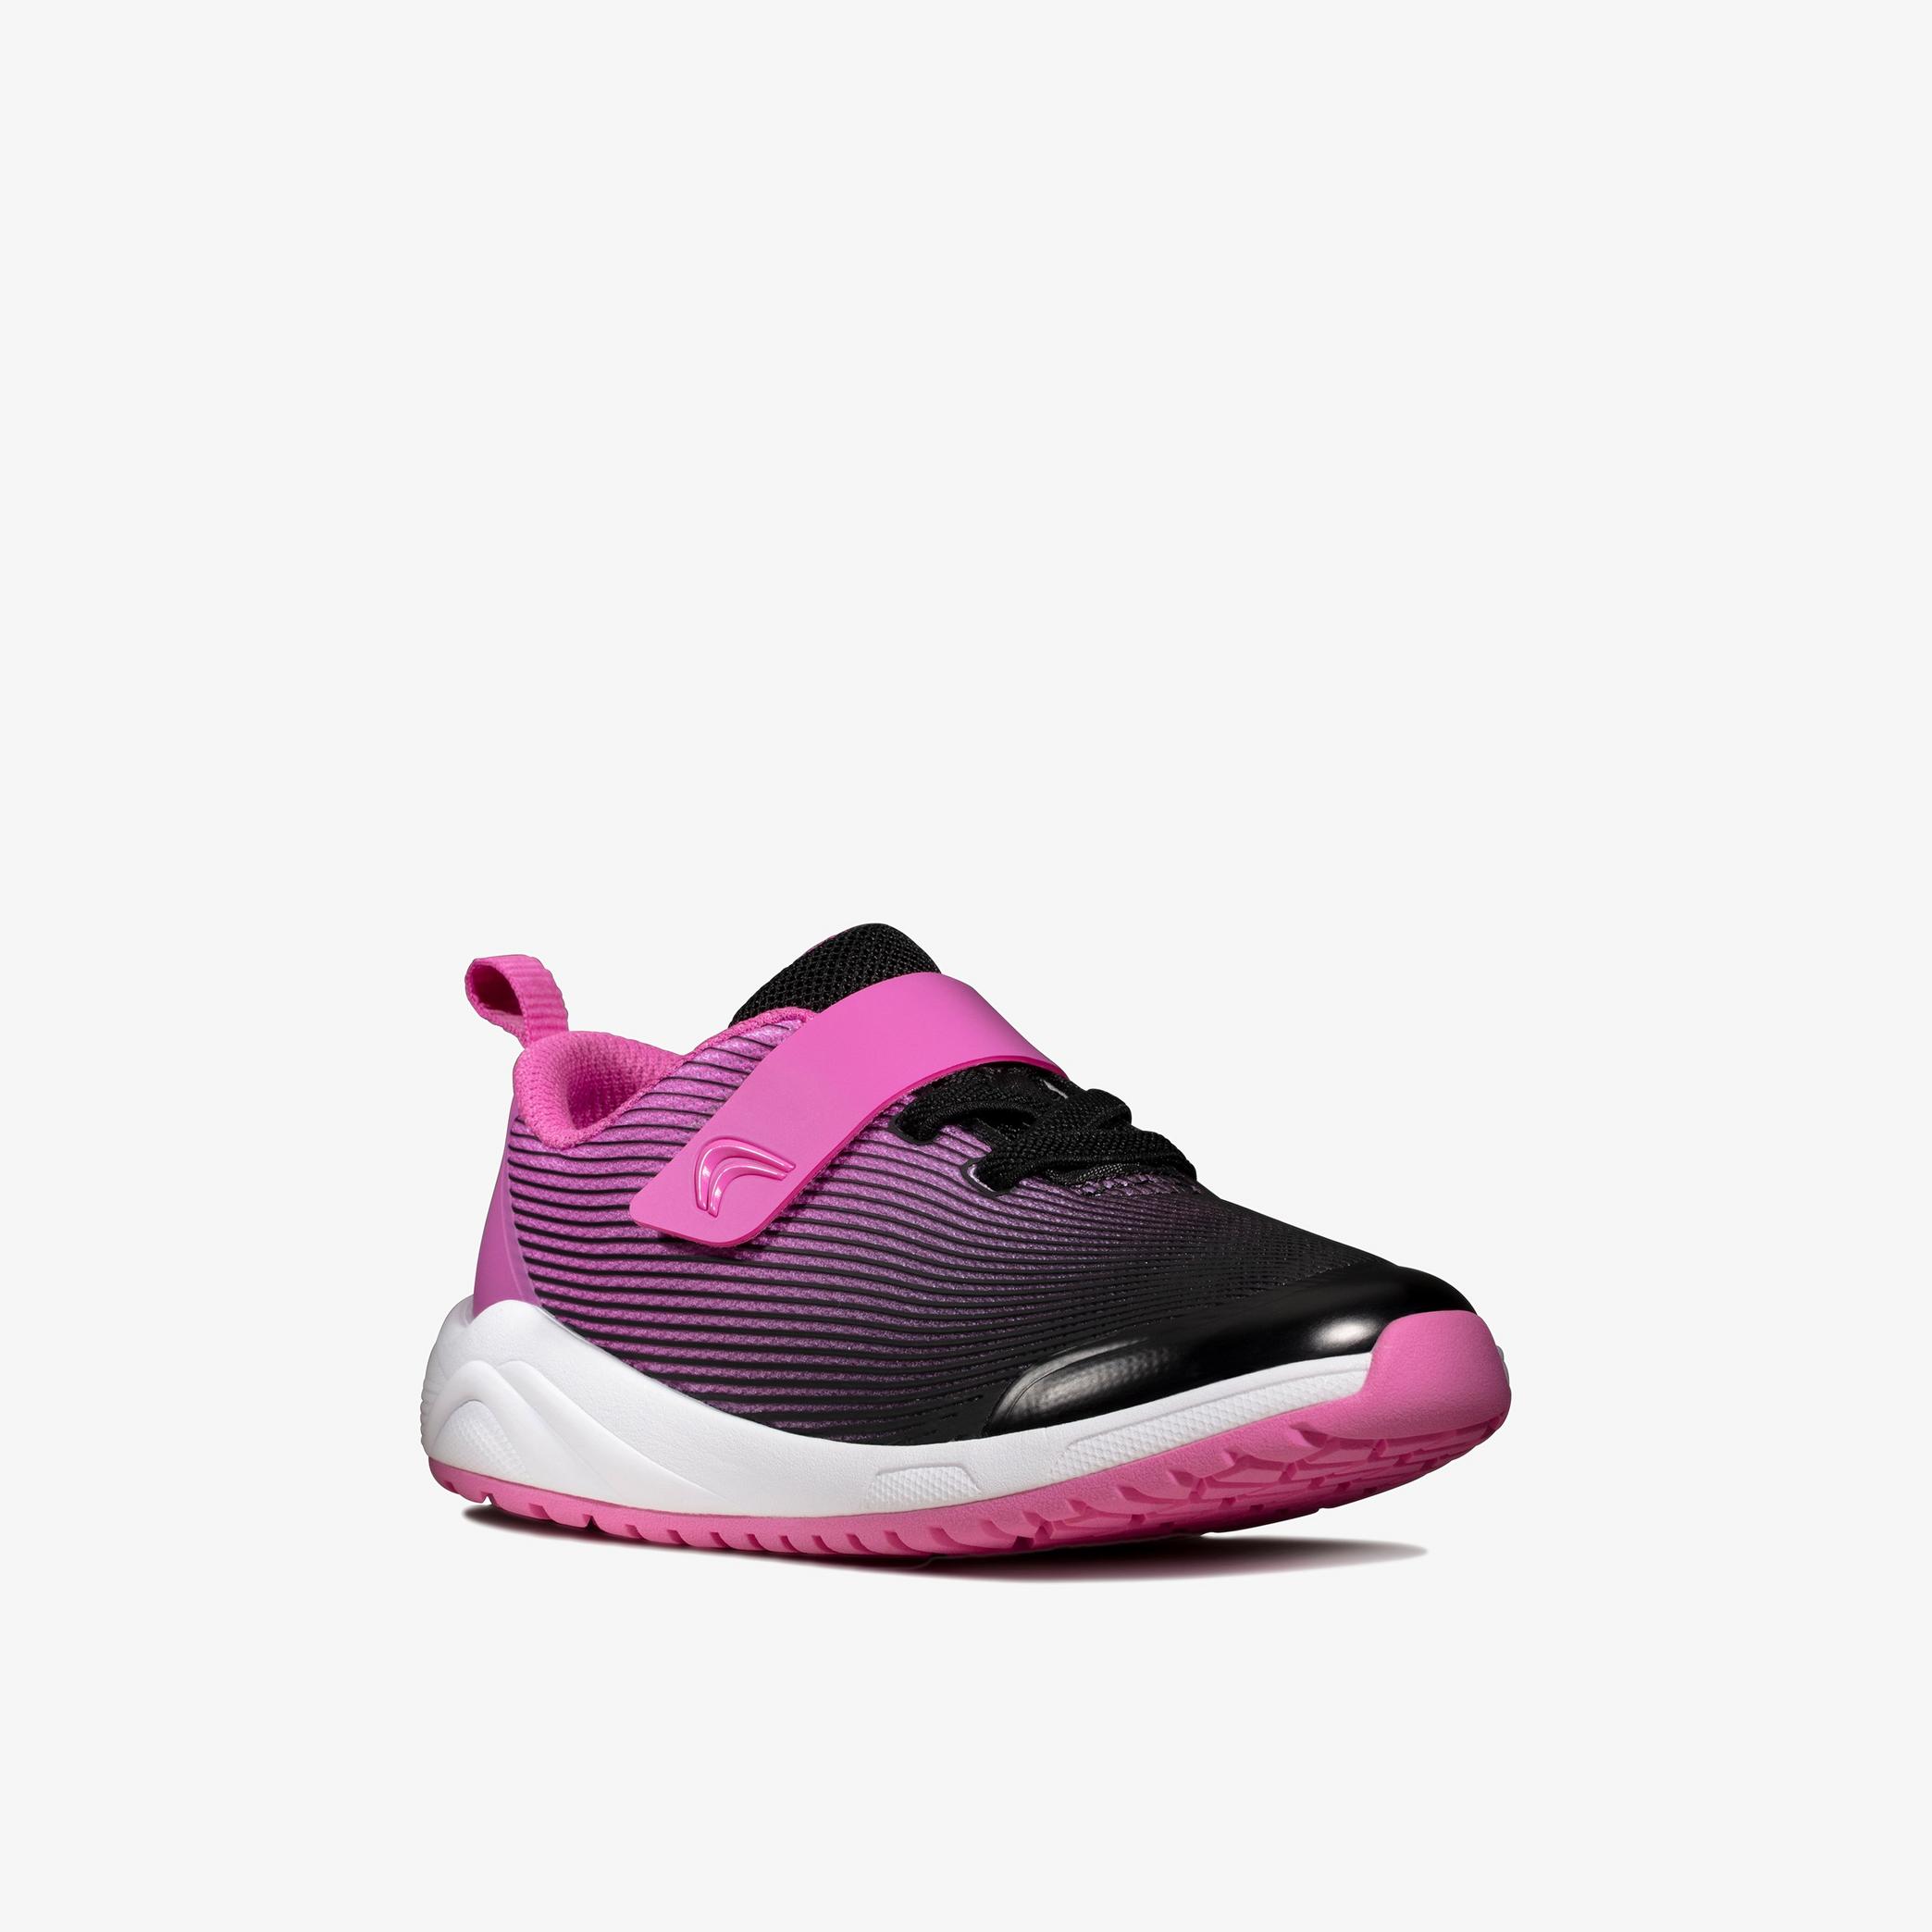 GIRLS Aeon Pace Toddler Pink Trainers | Clarks Outlet